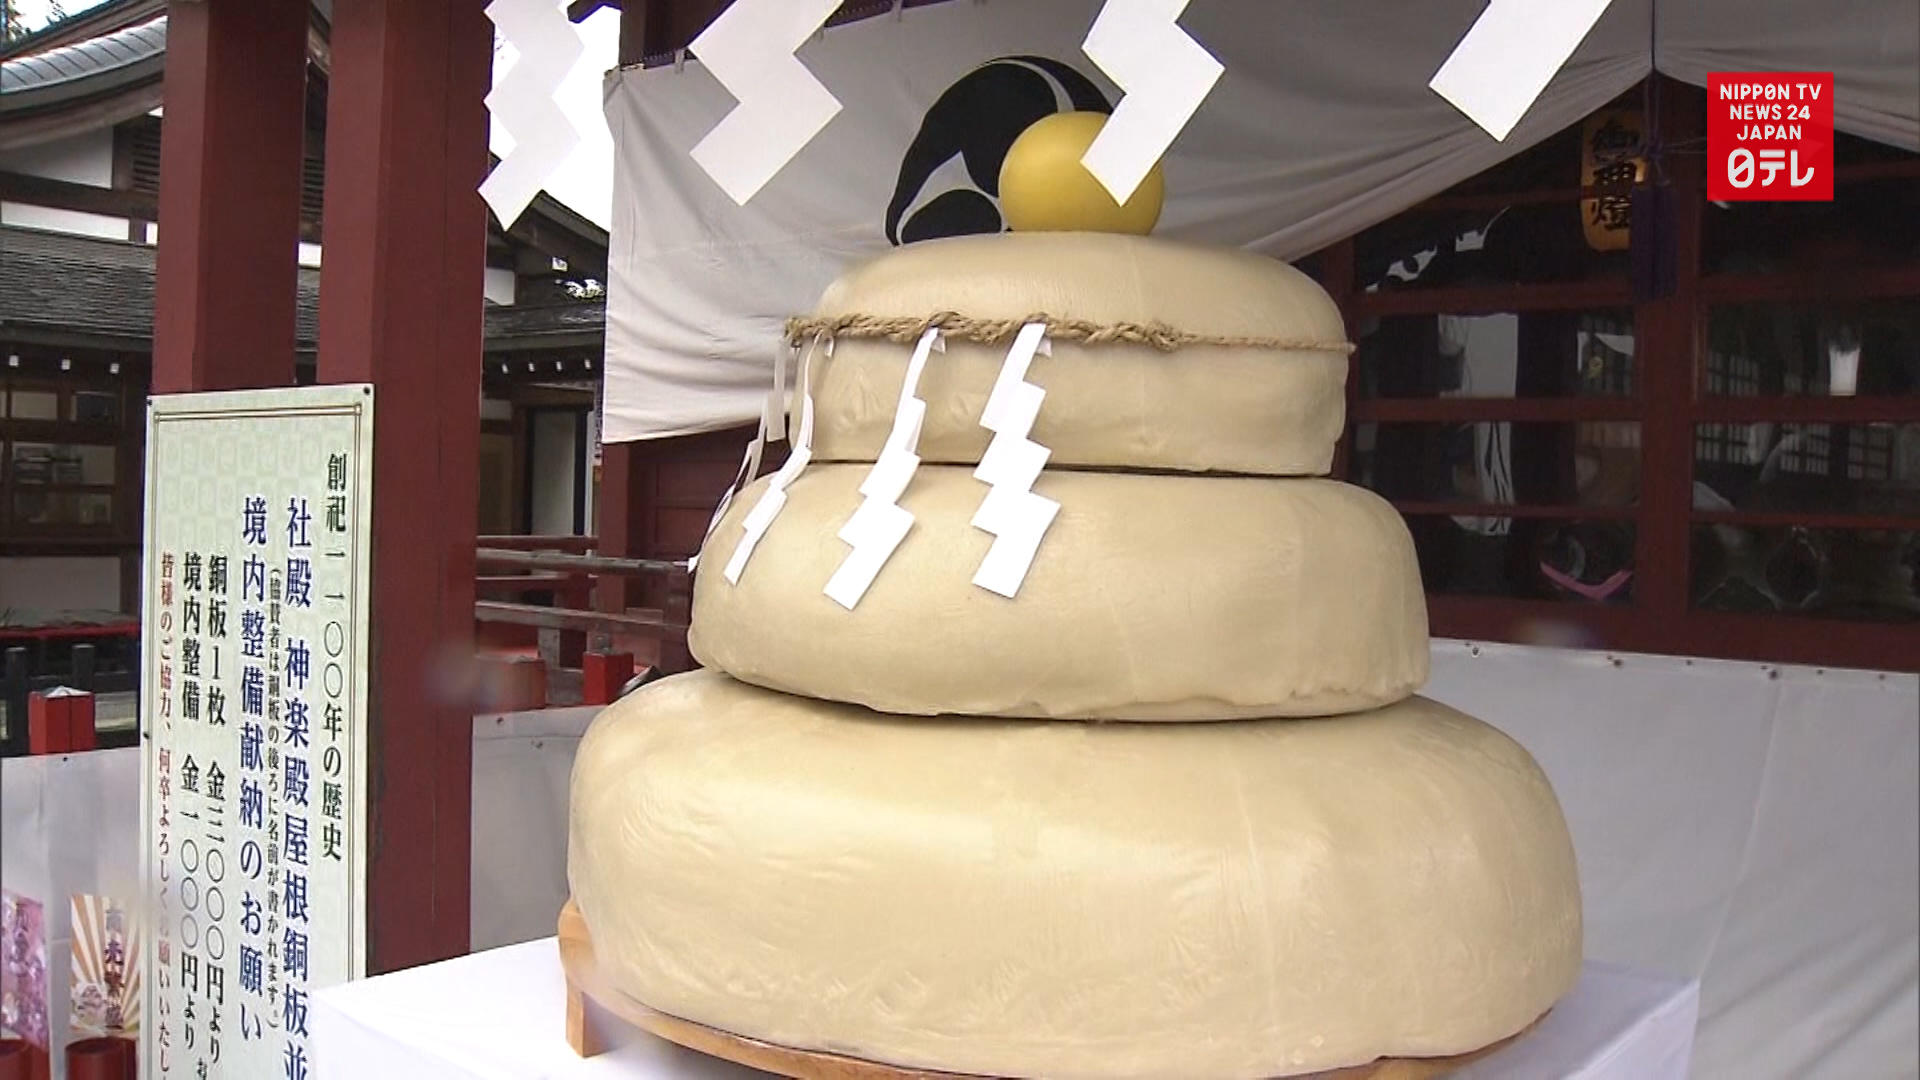 700-kg rice cakes offered to local shrine